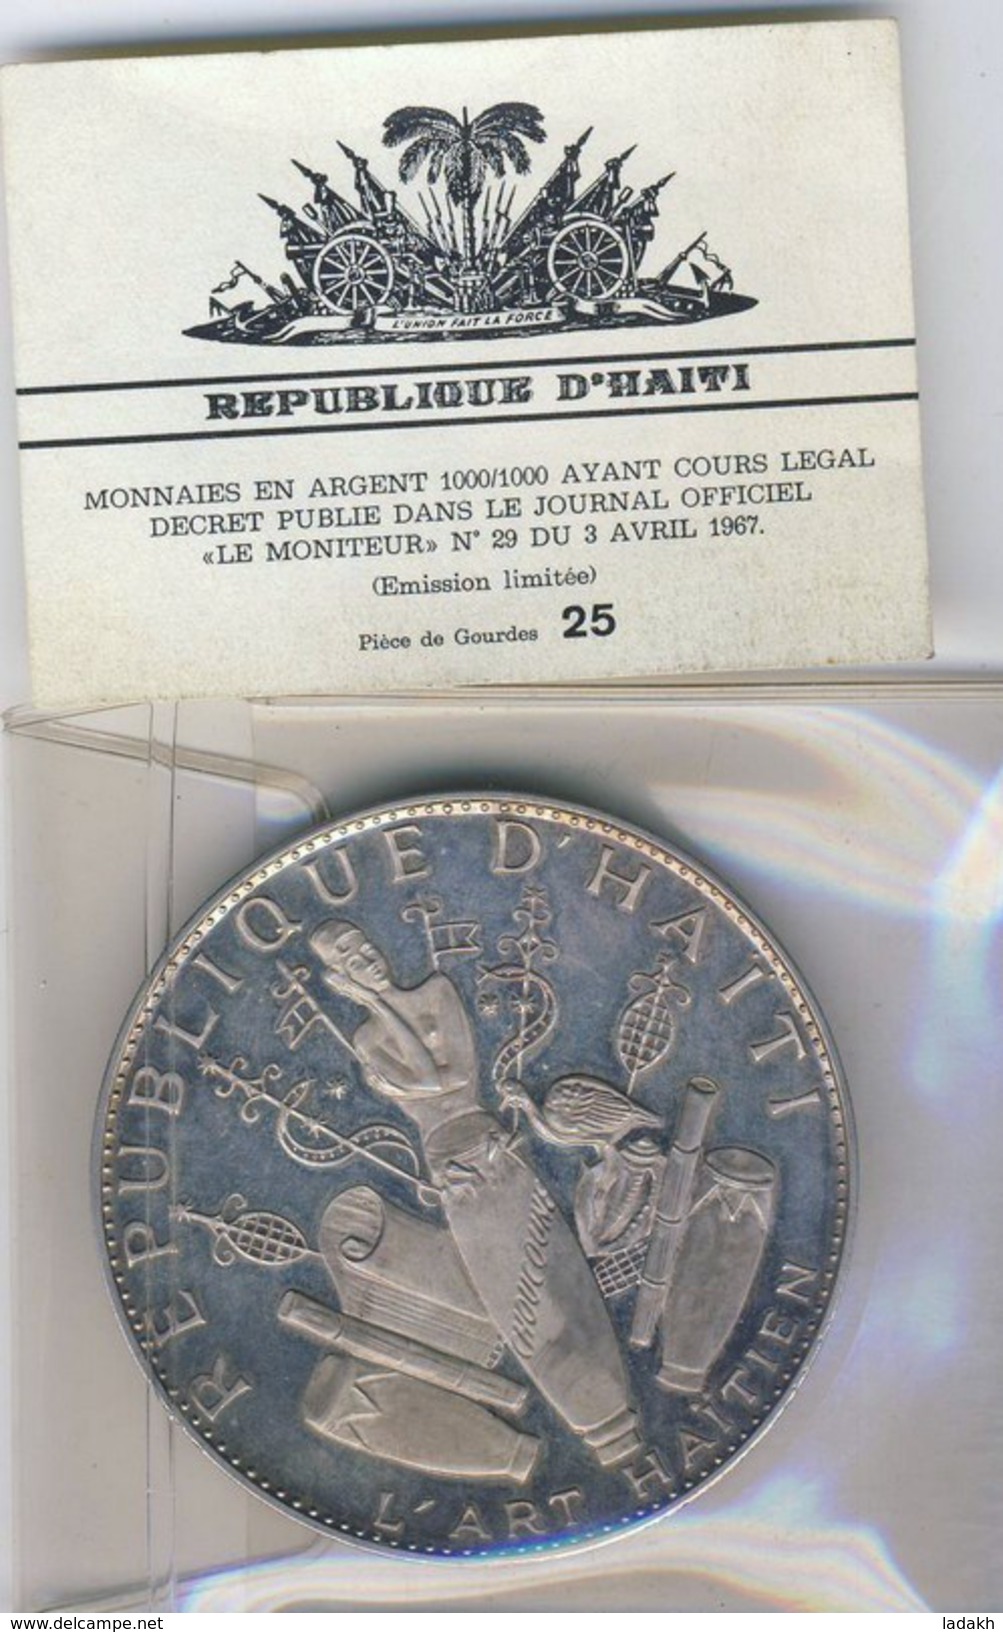 Details about   1967IC 25 Gourdes Haitian Art UltraCameo 66 Proof Silver Coin 